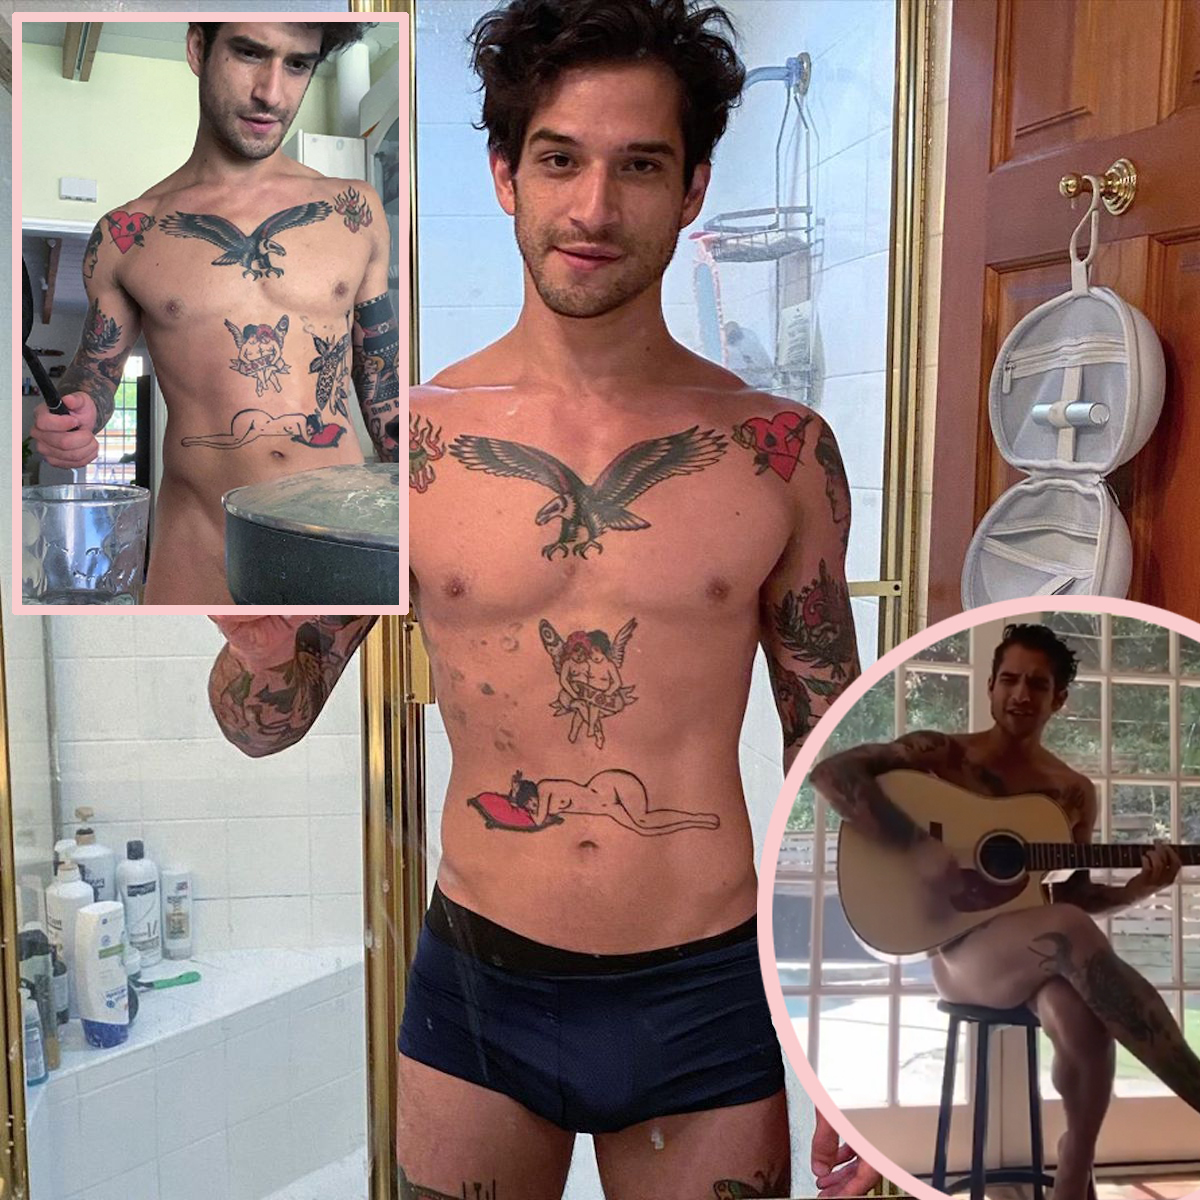 Teen Wolf Star Tyler Posey Joins OnlyFans (After Ex Bella Thorne Nearly Bro...